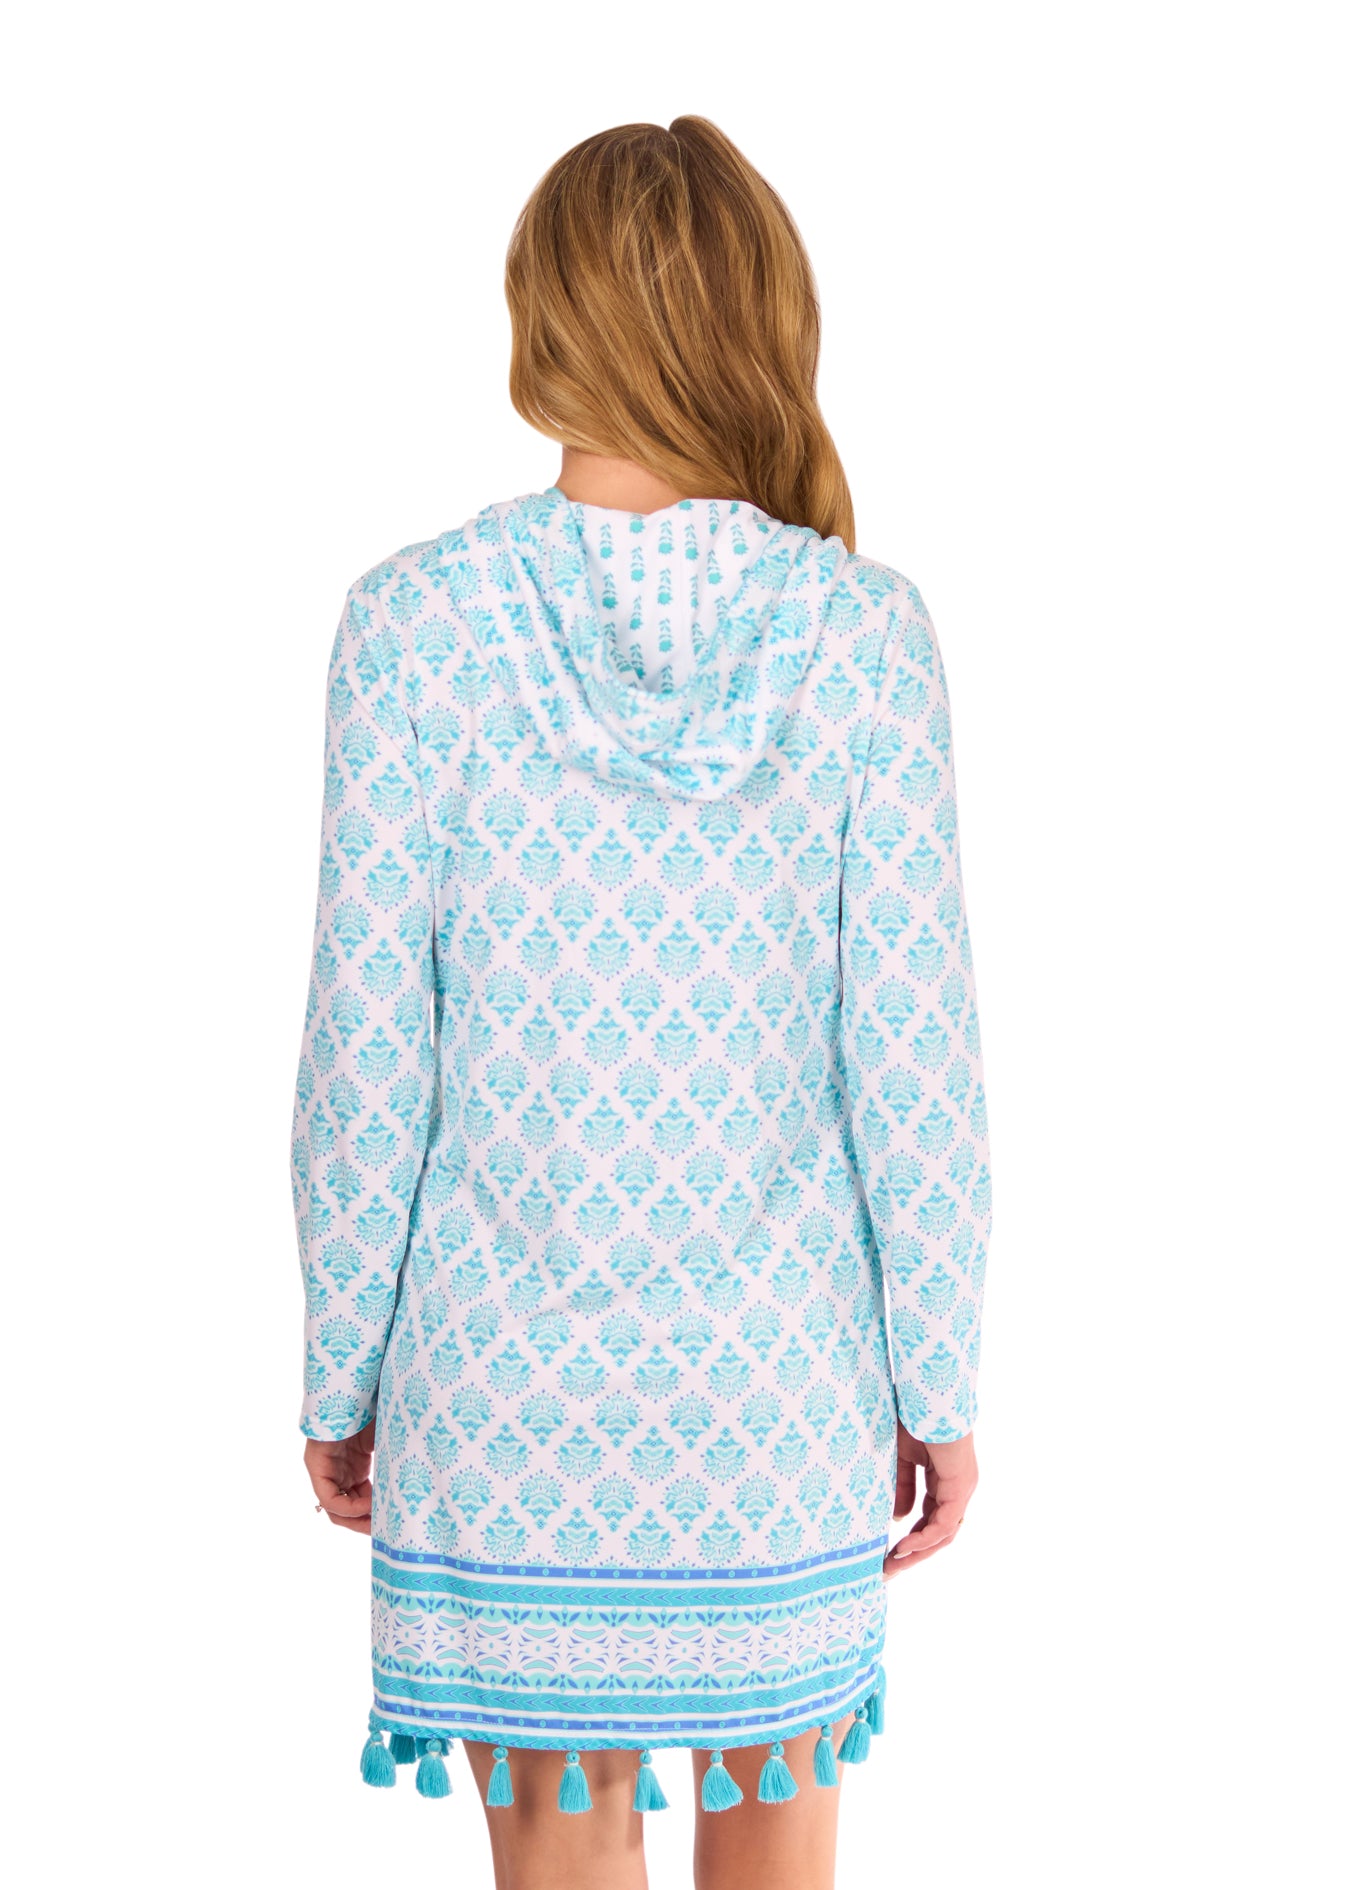 Back of woman in Amalfi Coast Hooded Cover Up